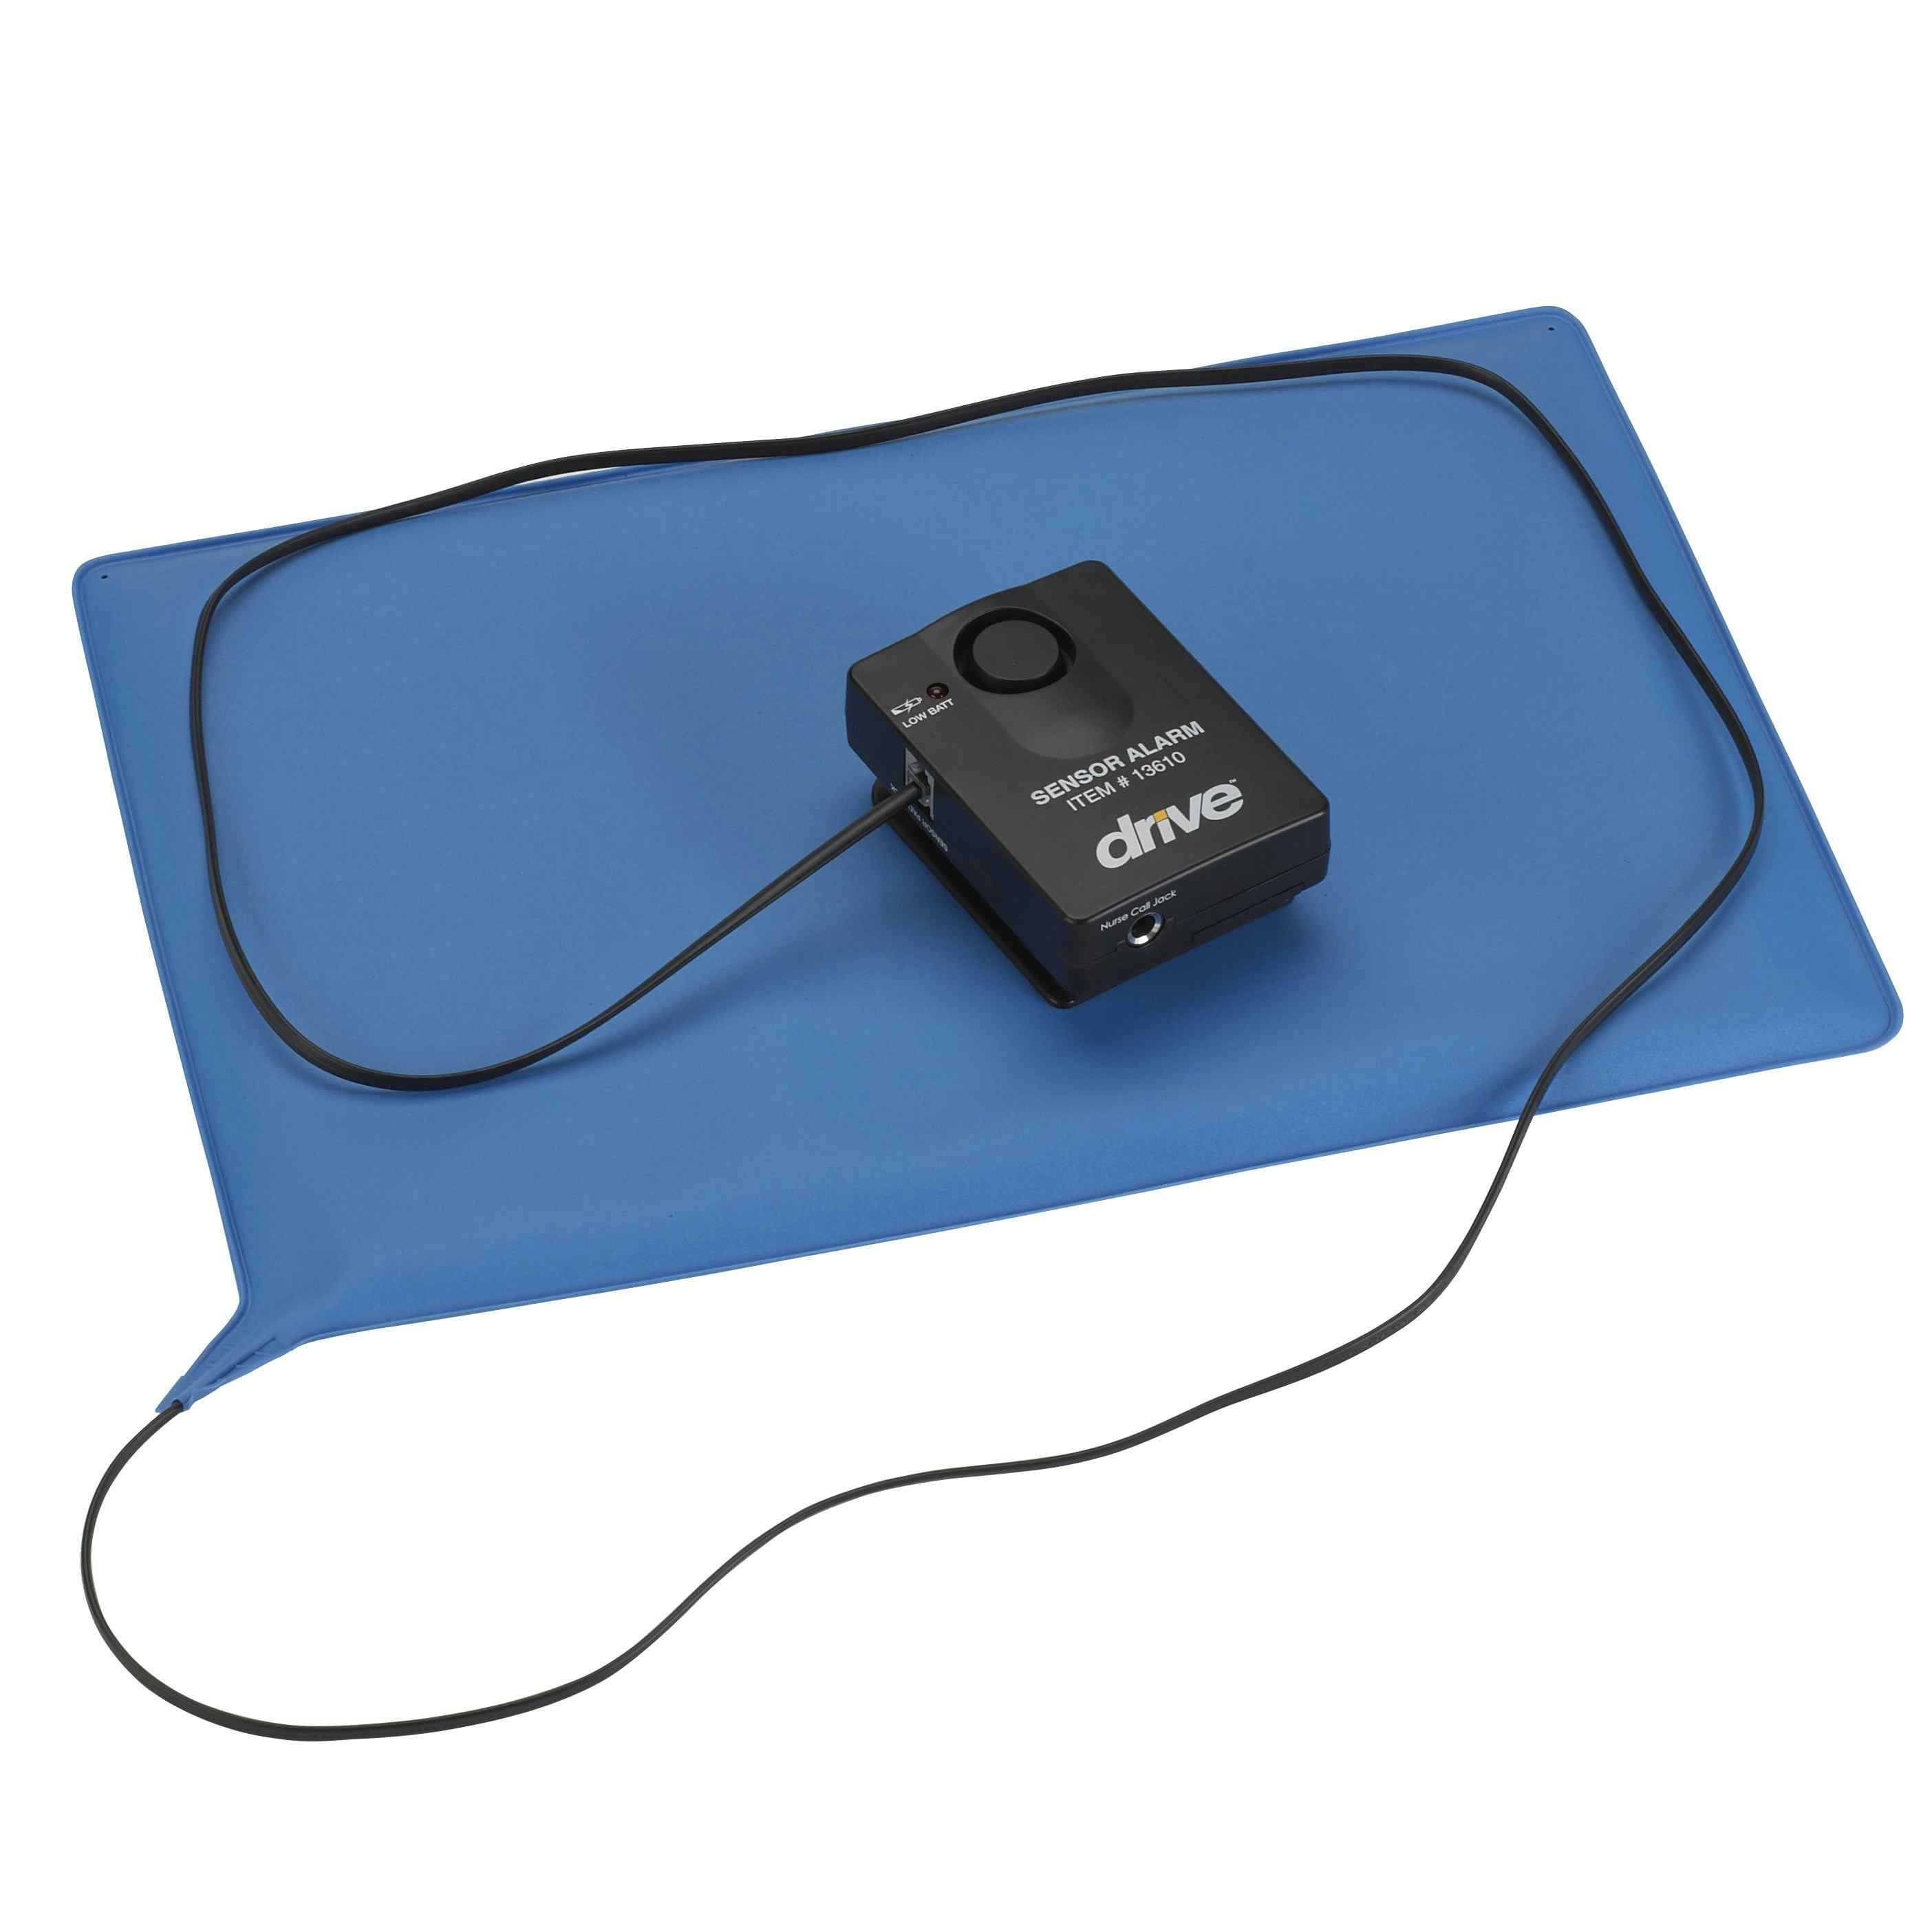 drive Pressure-Sensitive Chair and Bed Patient Alarm, 13605, 1 Each